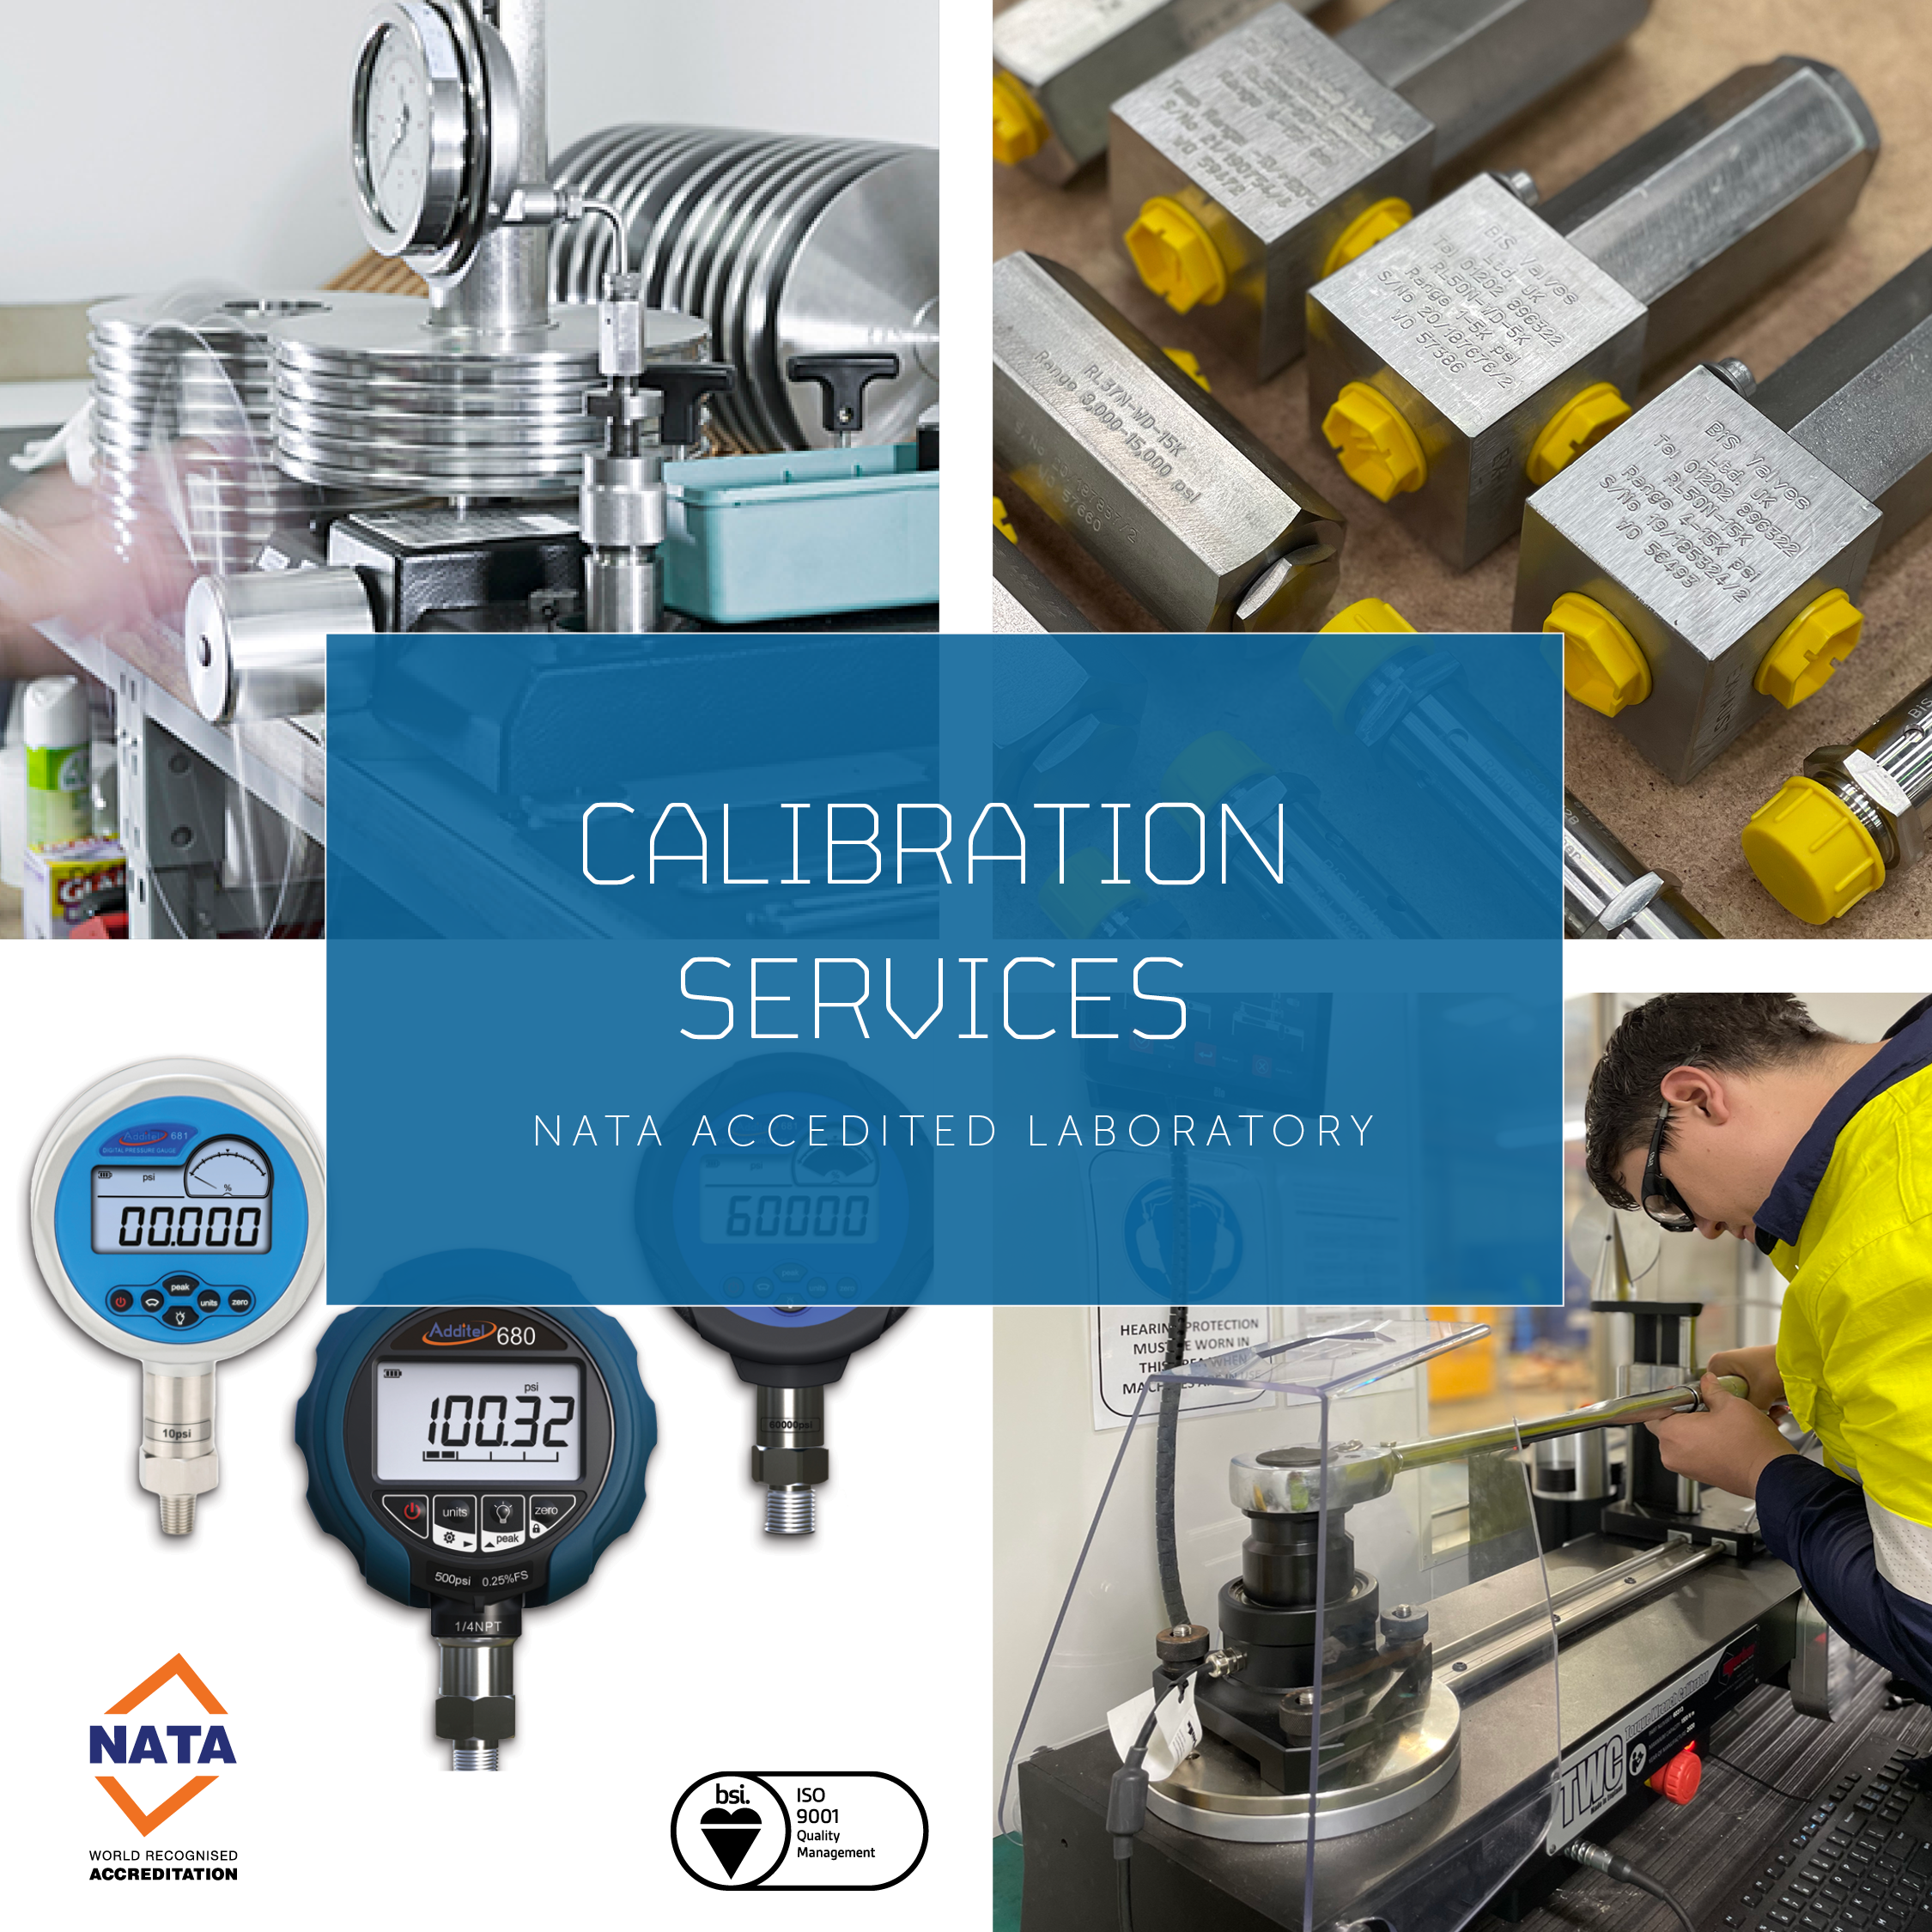 Know more about our Calibration Services